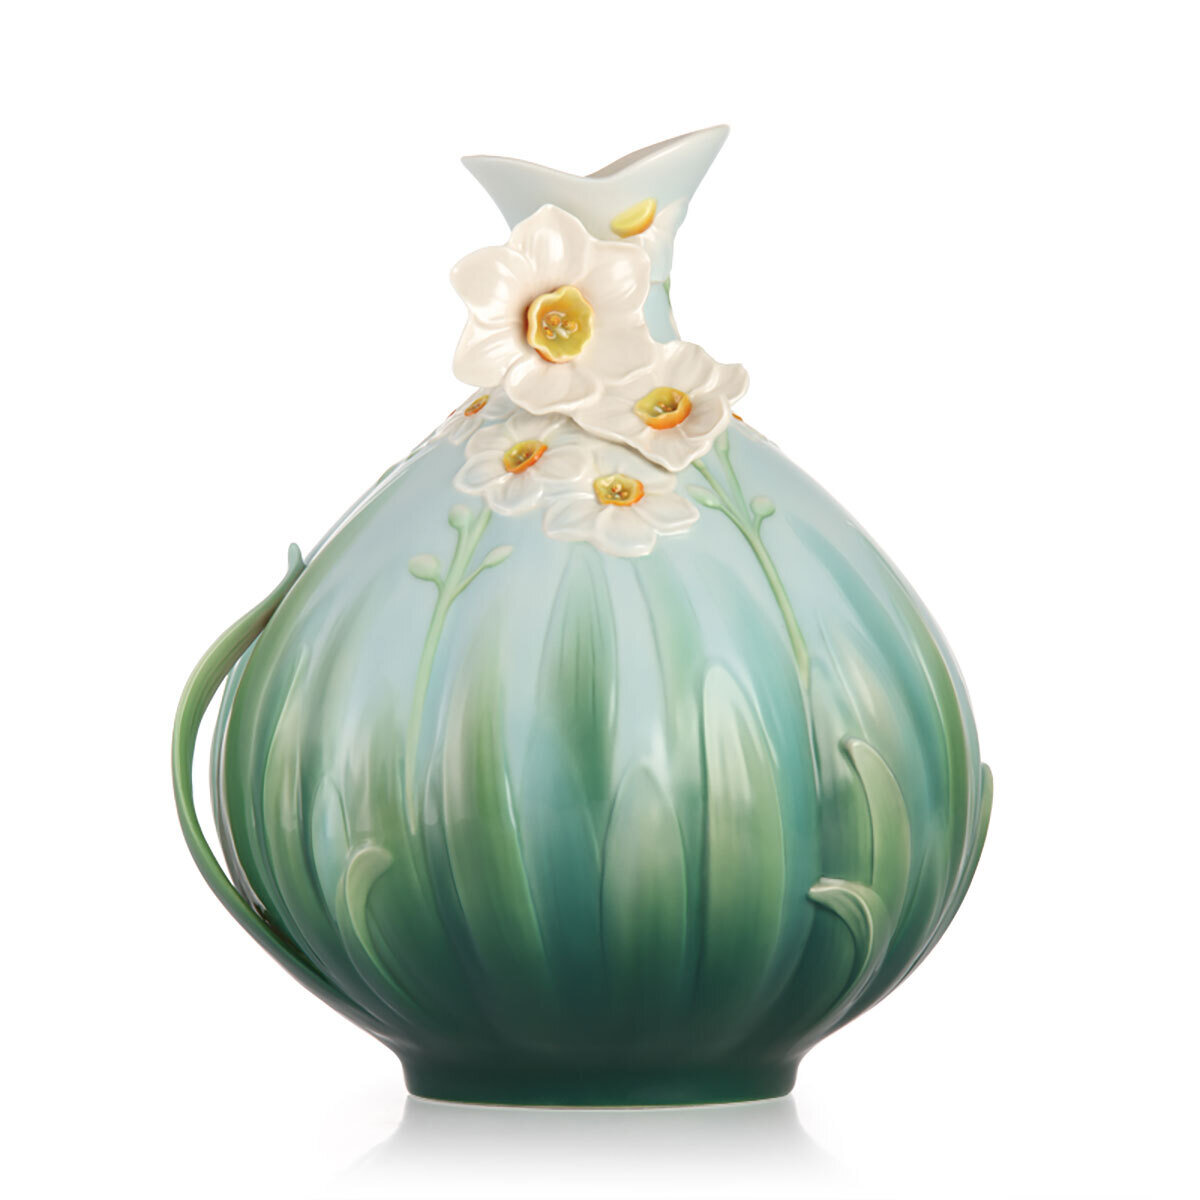 Franz Porcelain Continuous Luck Daffodil Vase FZ03193